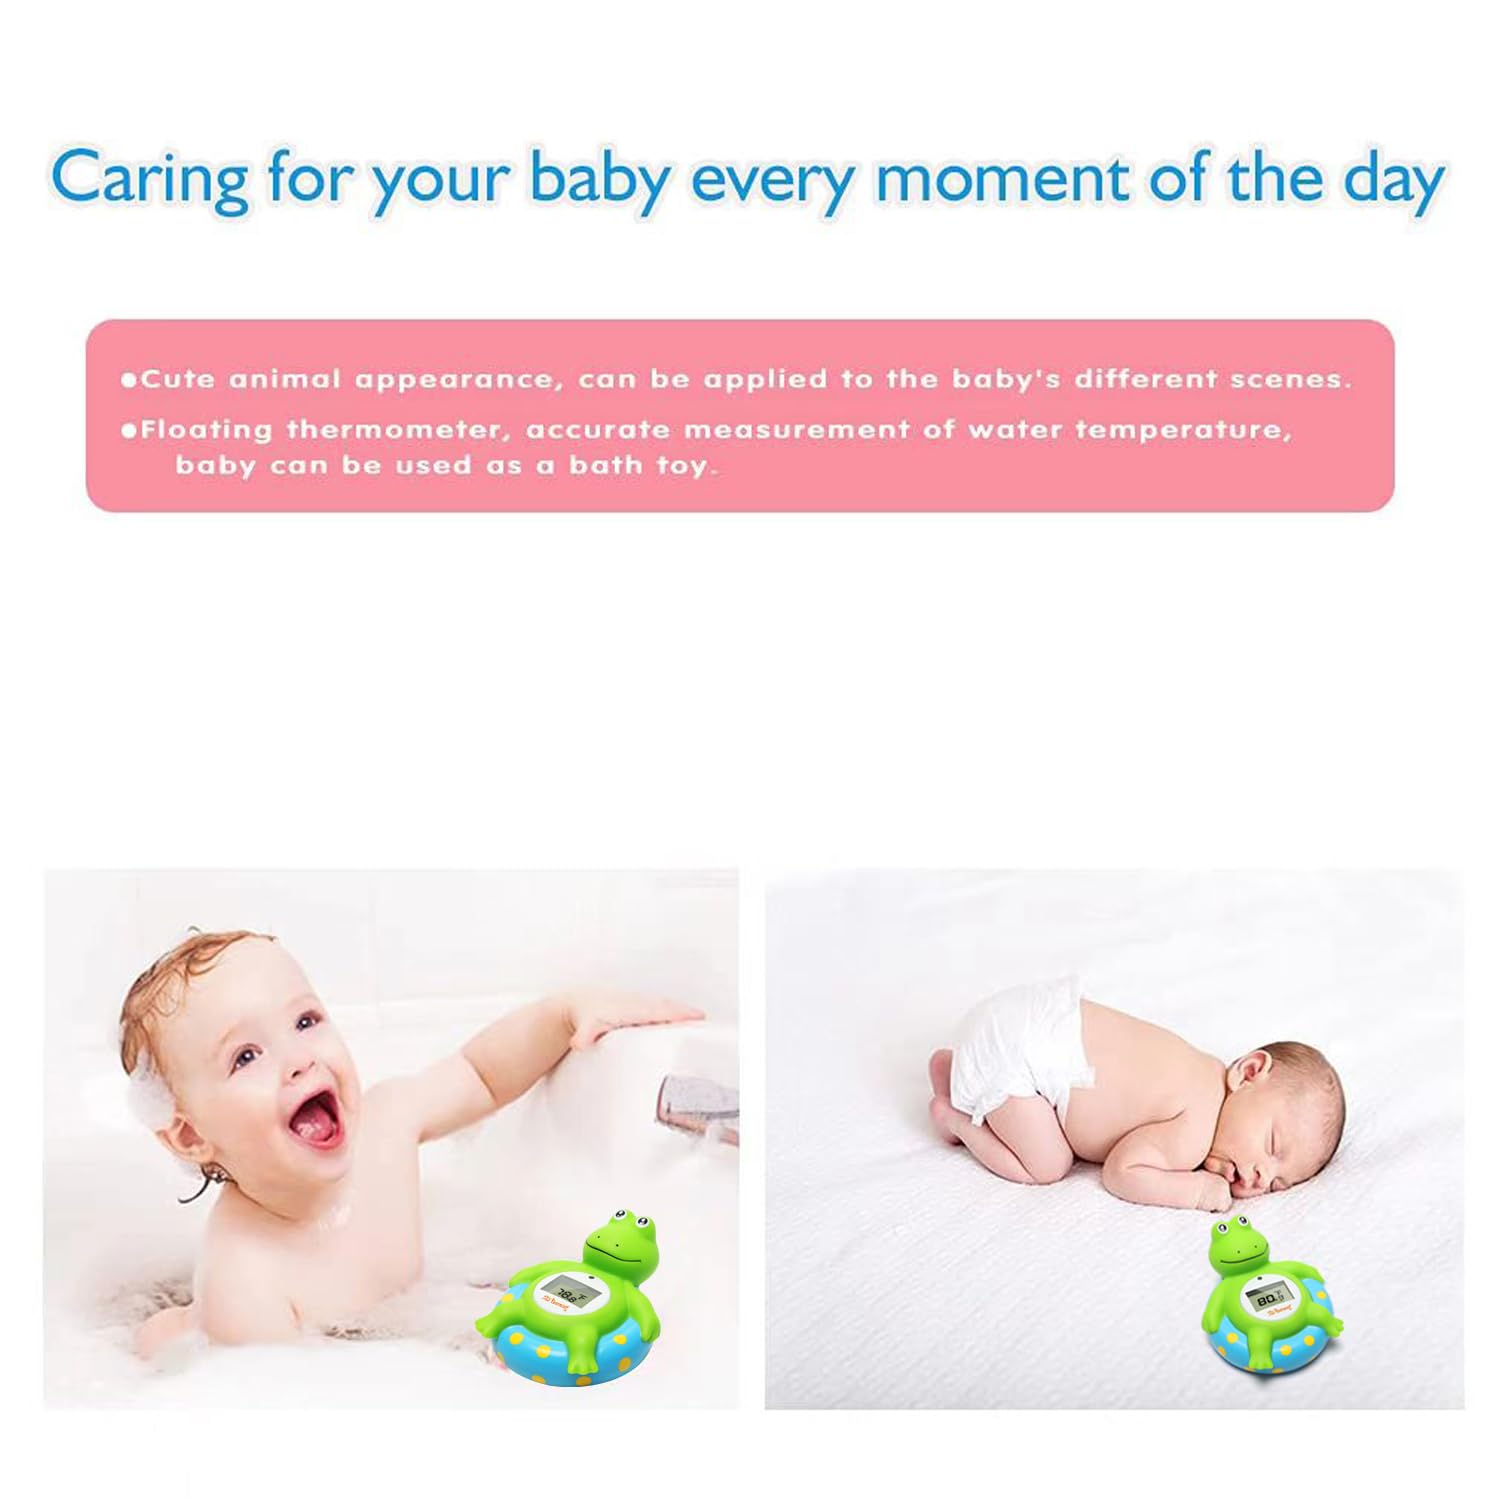 Doli Yearning Baby Bath Thermometer with Room Temperature| Fahrenheit and Celsius|Frog Lovely Shape|Kids' Bathroom Safety Products| Bath Toys… : Baby